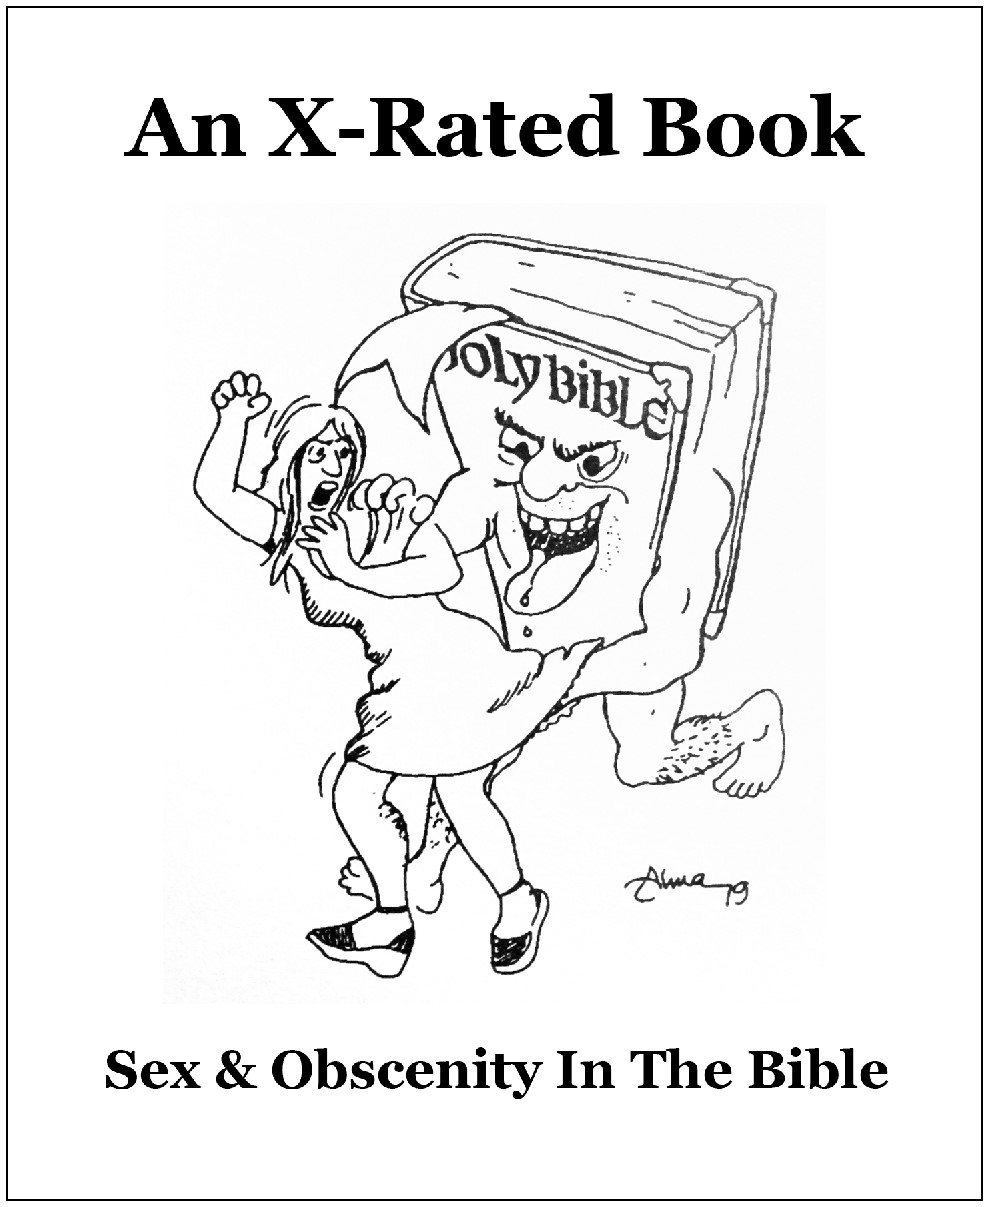 An X-Rated Book